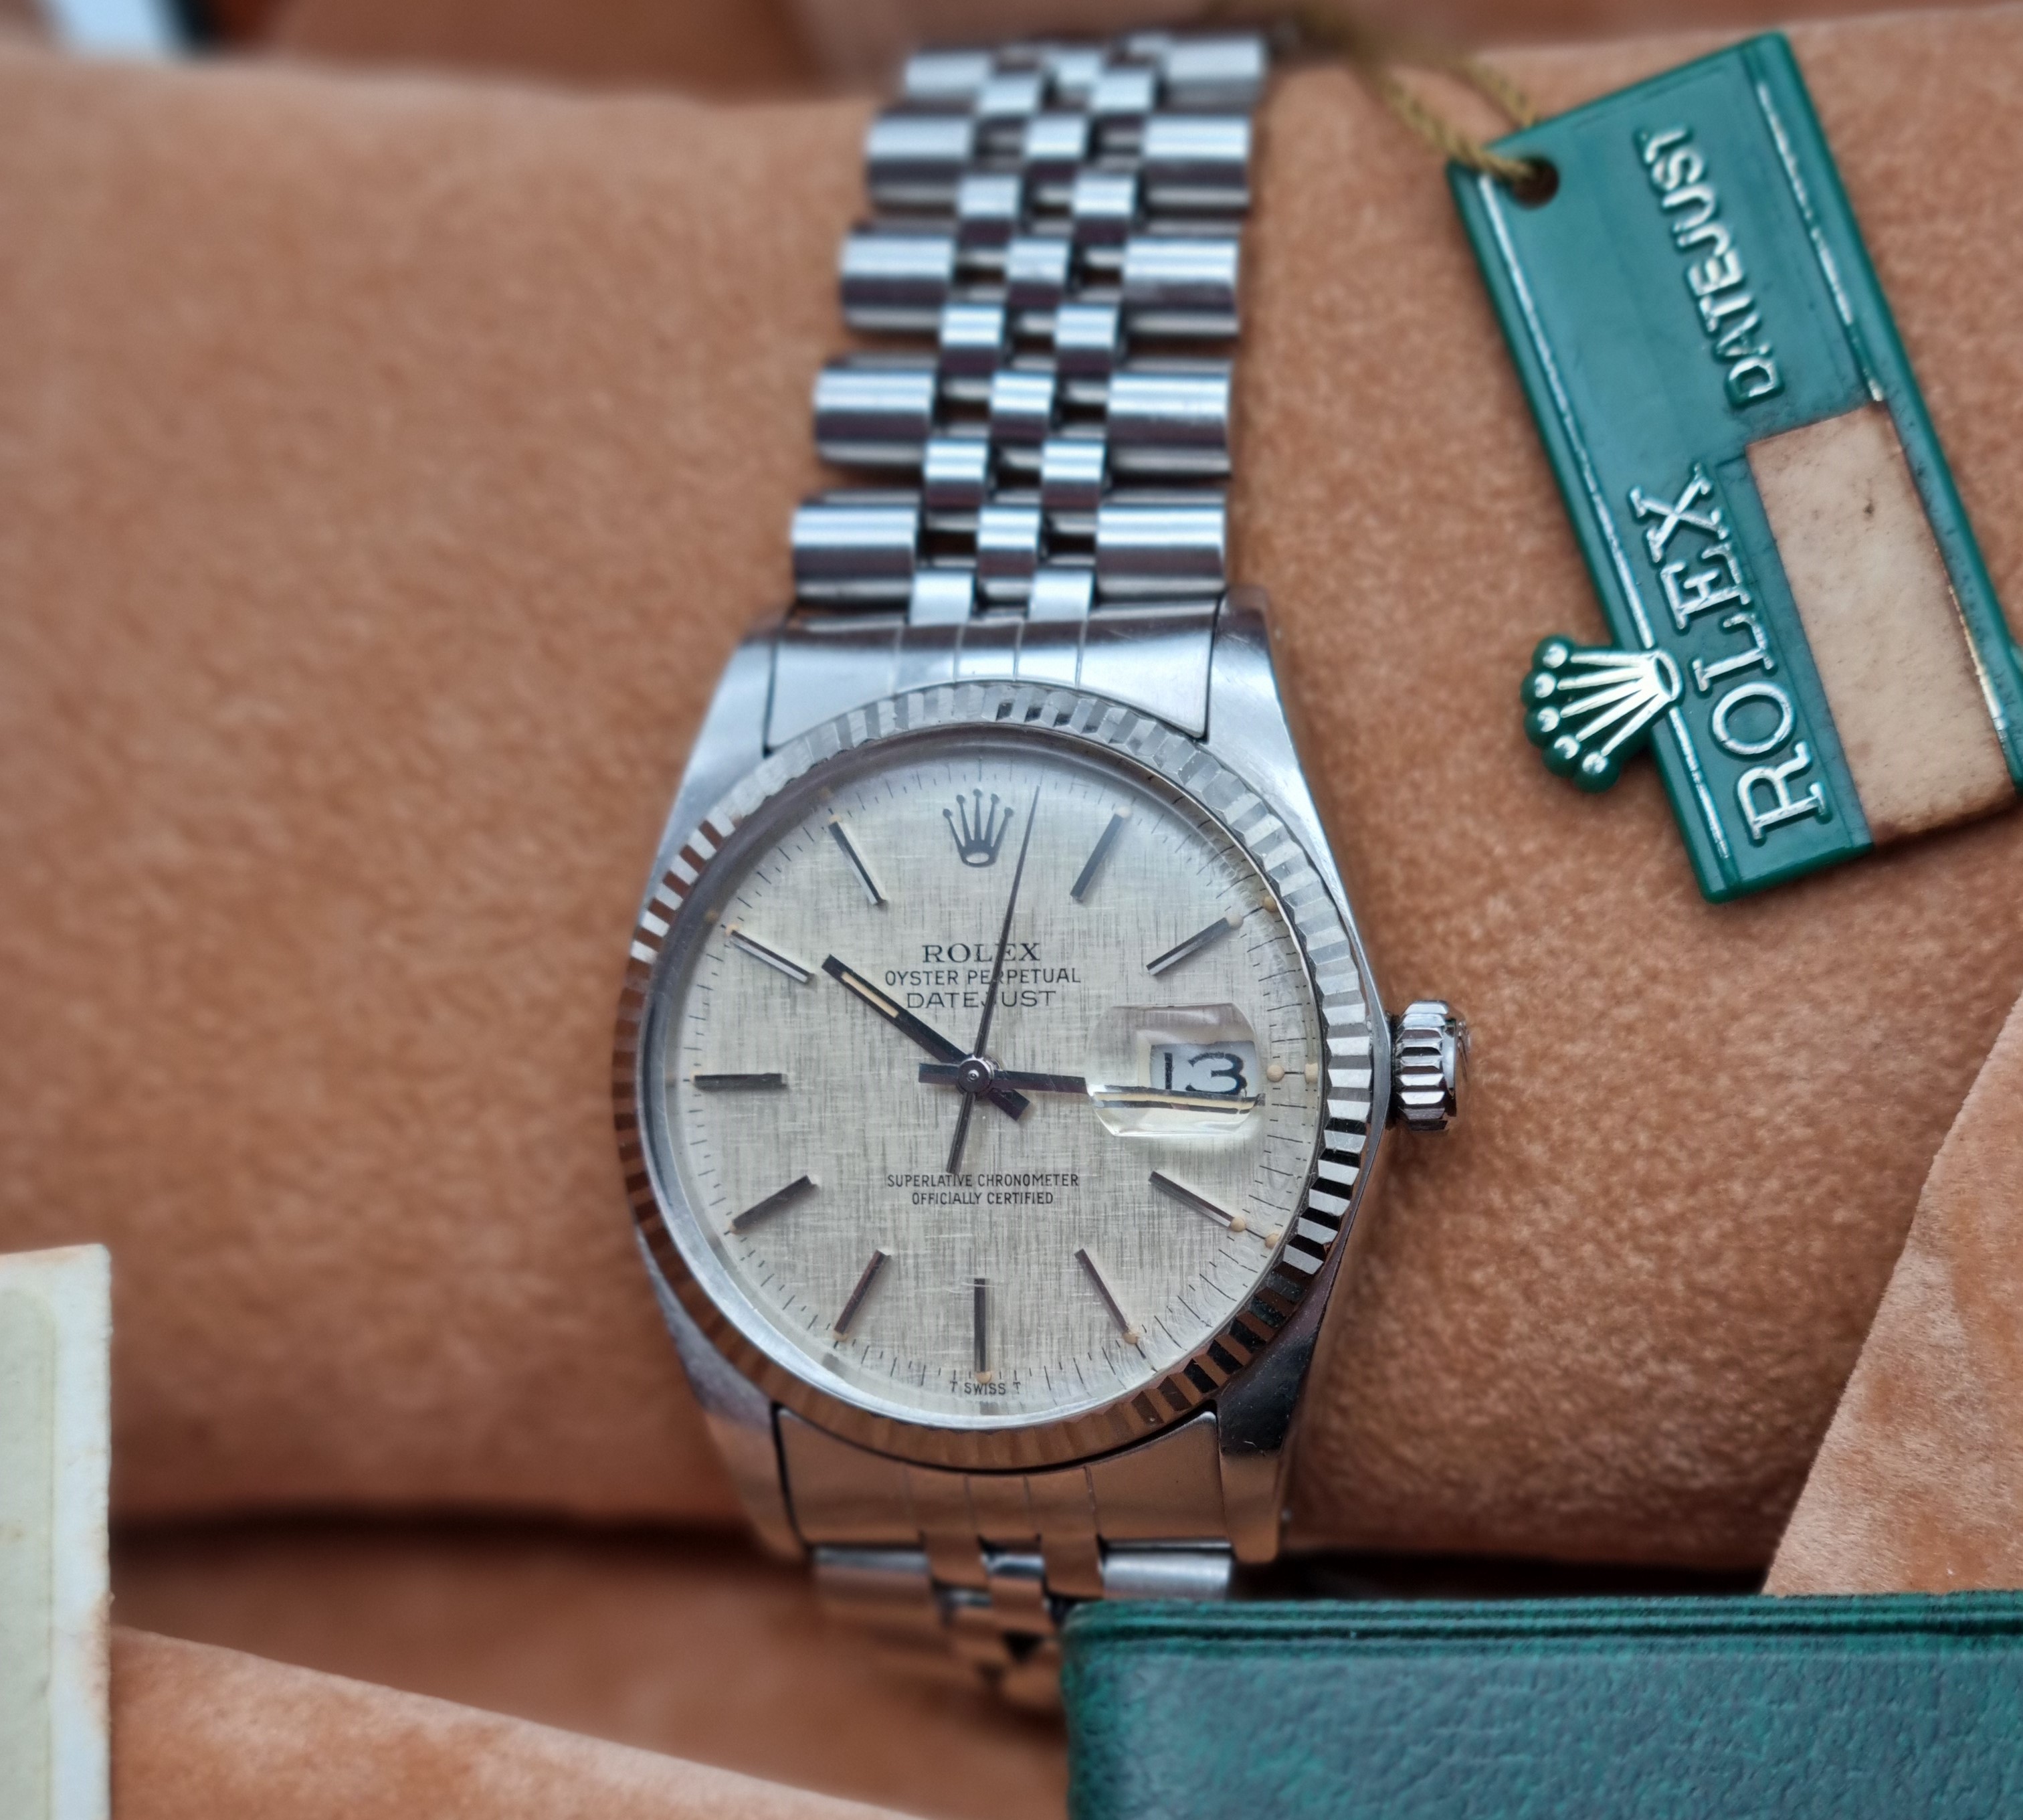 Rolex Datejust Datejust 36 16014 Datejust 36 Silver Linen Dial 1983 box paper tag with serial number plastic wallet | San Giorgio a Cremano